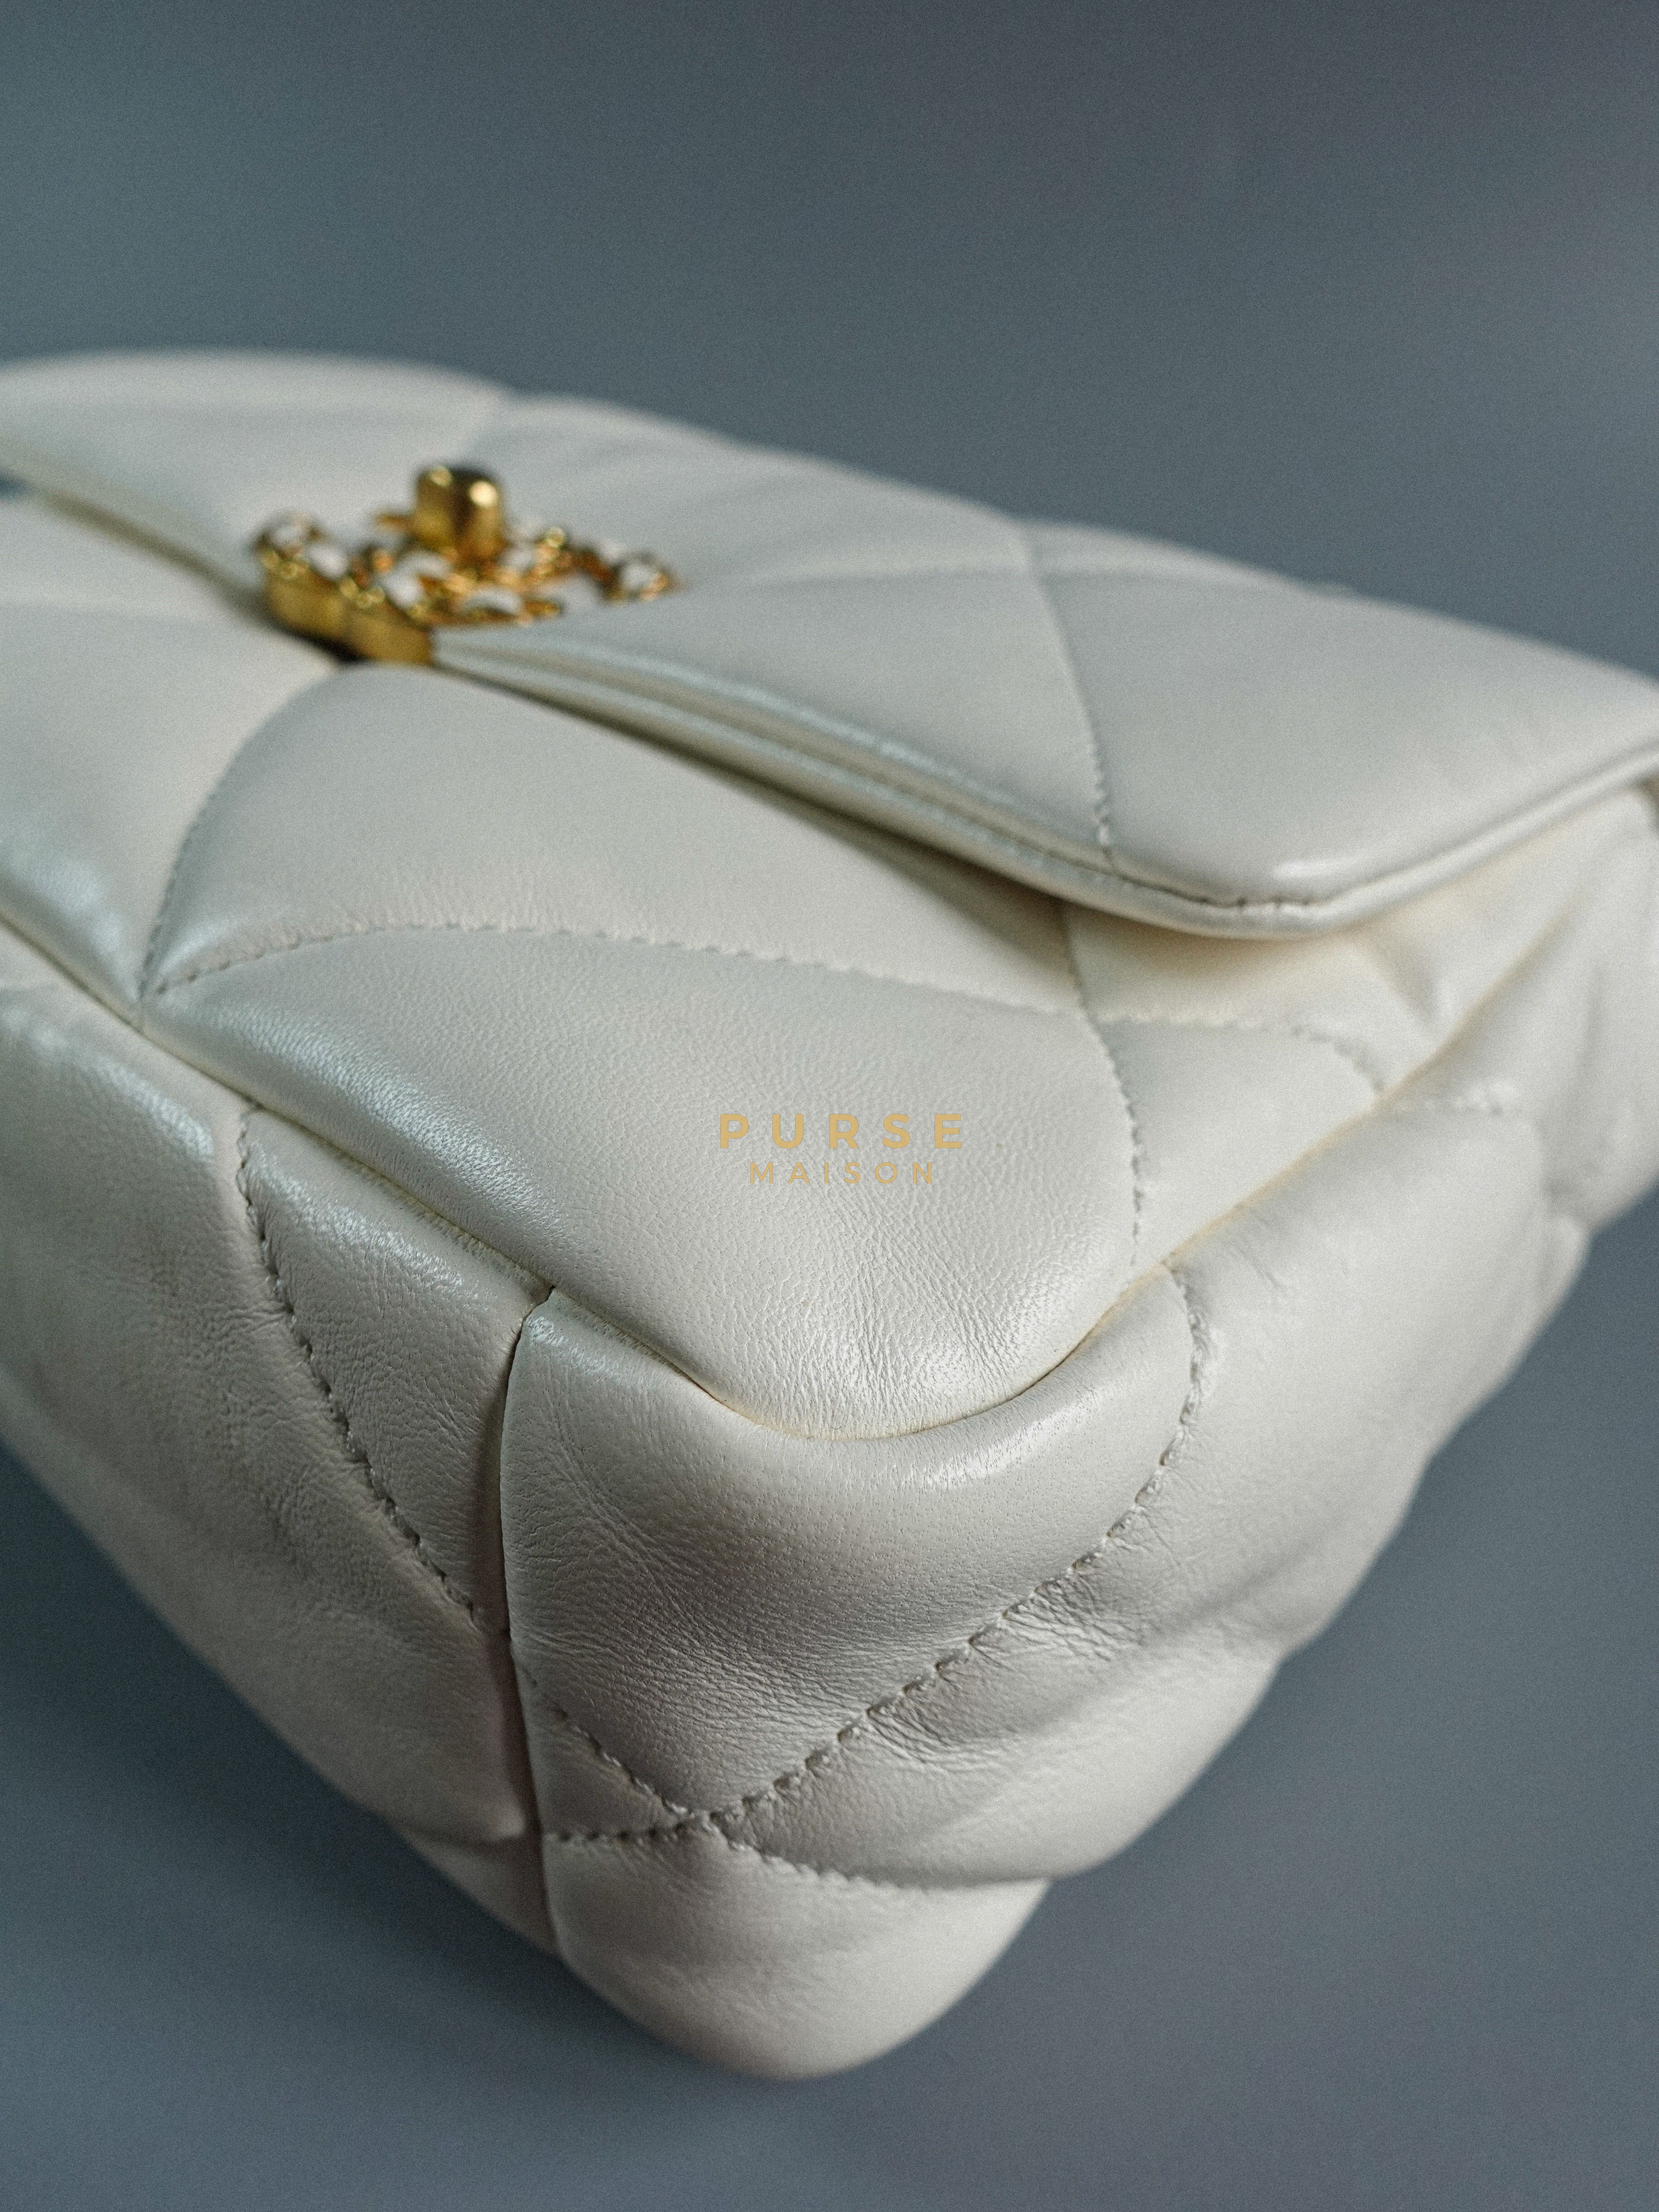 19 Small Flap Bag in White Lambskin Leather and Mixed Hardware (Microchip) | Purse Maison Luxury Bags Shop